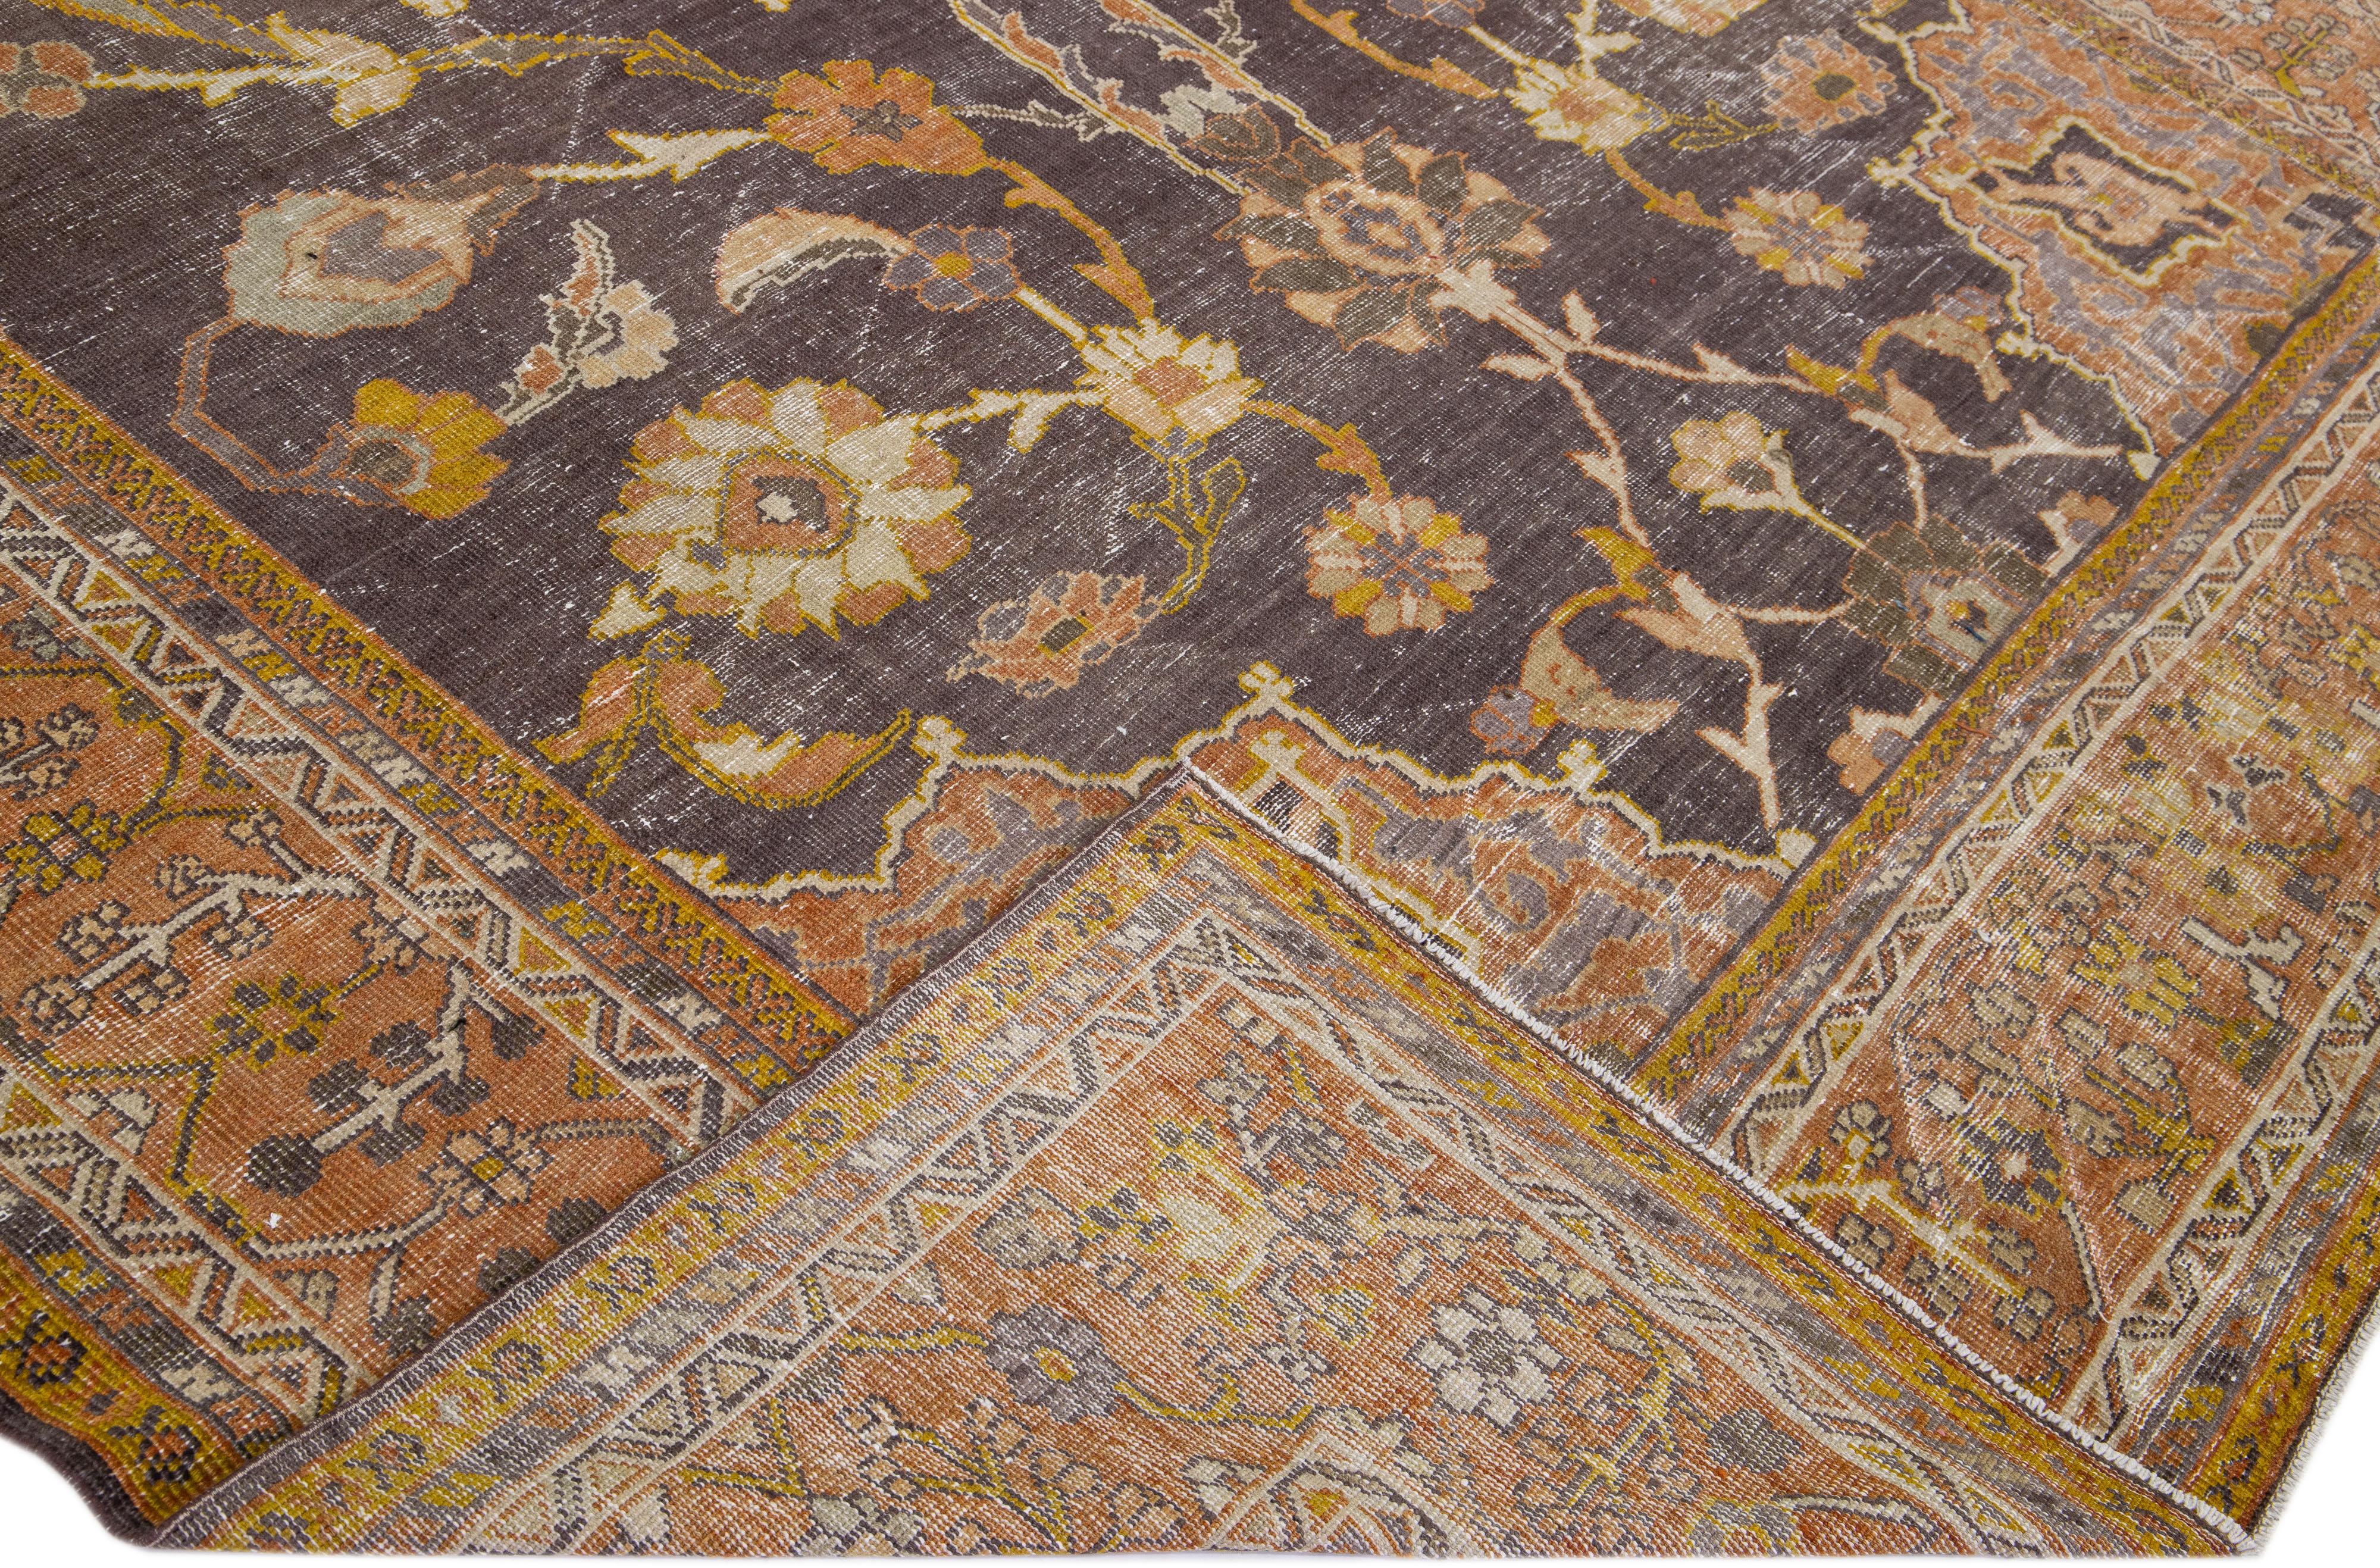 A beautiful Antique Mahal hand-knotted wool rug with a gray field. This Persian rug has rust-orange color accents in an all-over floral medallion design.

This rug measures 9'10